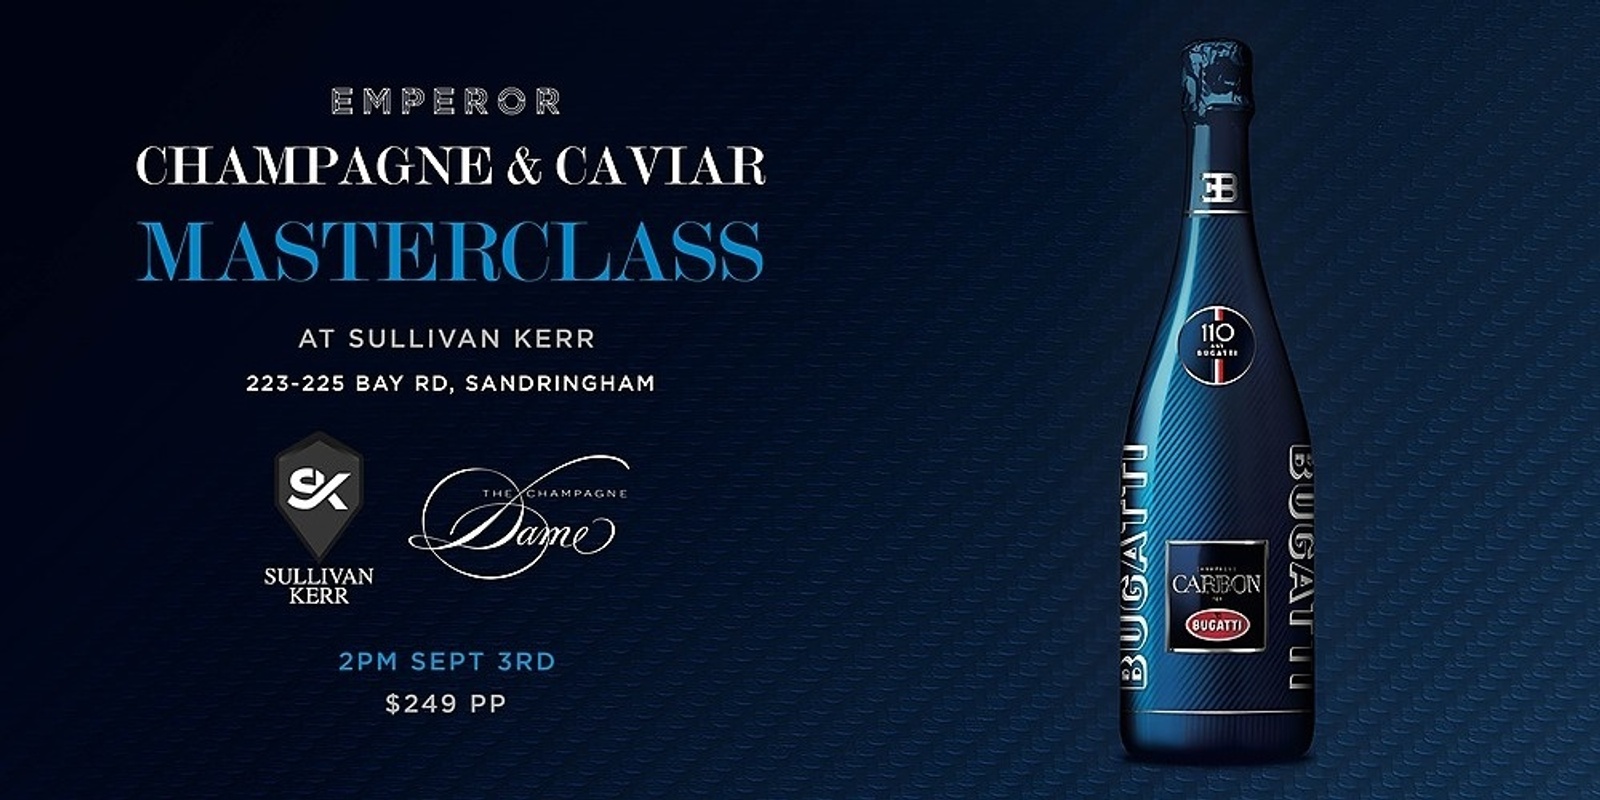 Banner image for Champagne & Caviar Masterclass